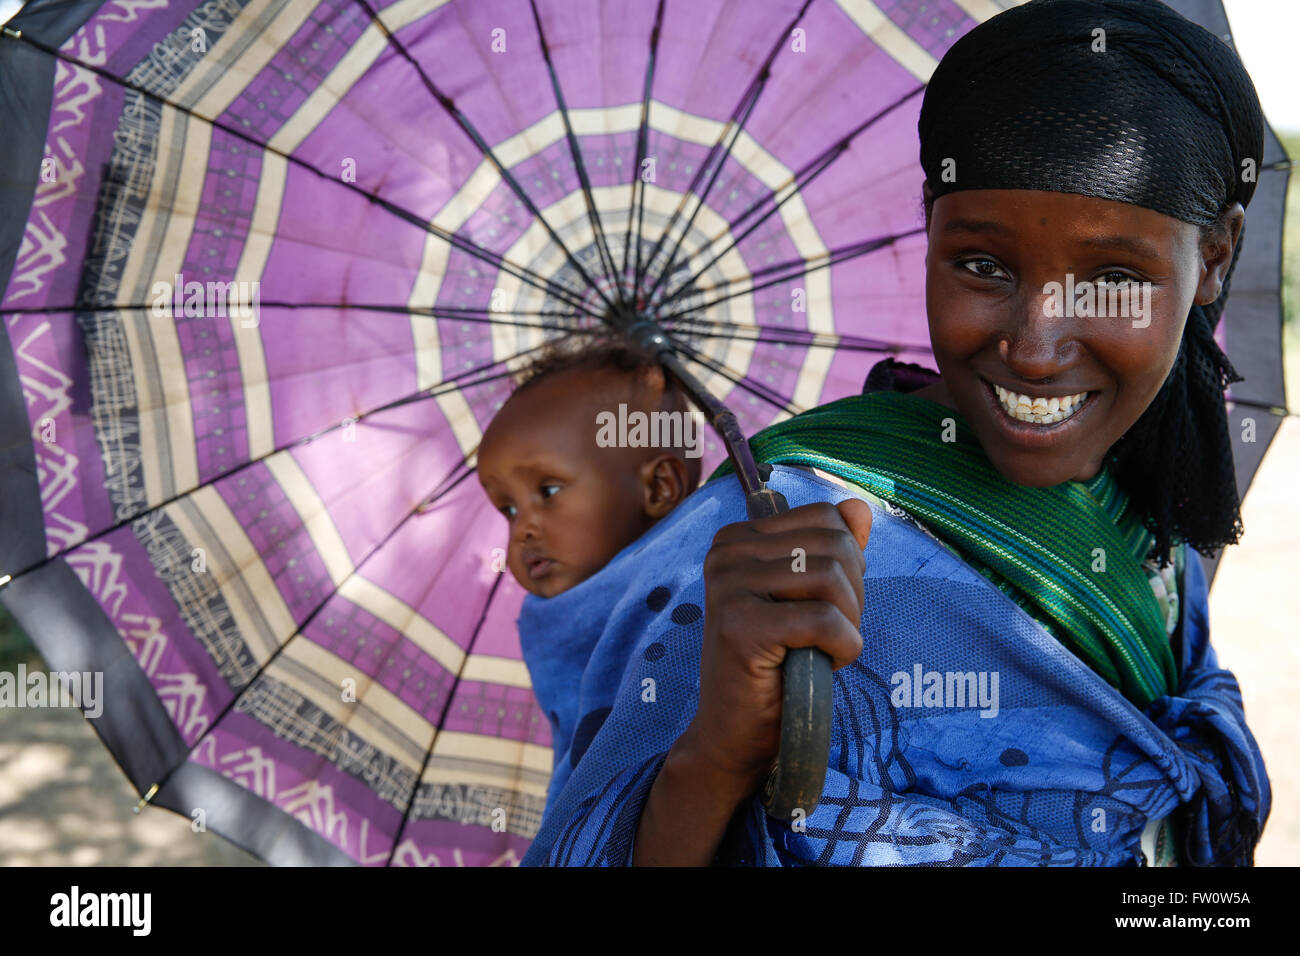 Between Mojo and Ziway, Ethiopia, October 2013: A young mother shelters her baby son from strong sun with her umbrella.   Photograph by Mike Goldwater Stock Photo